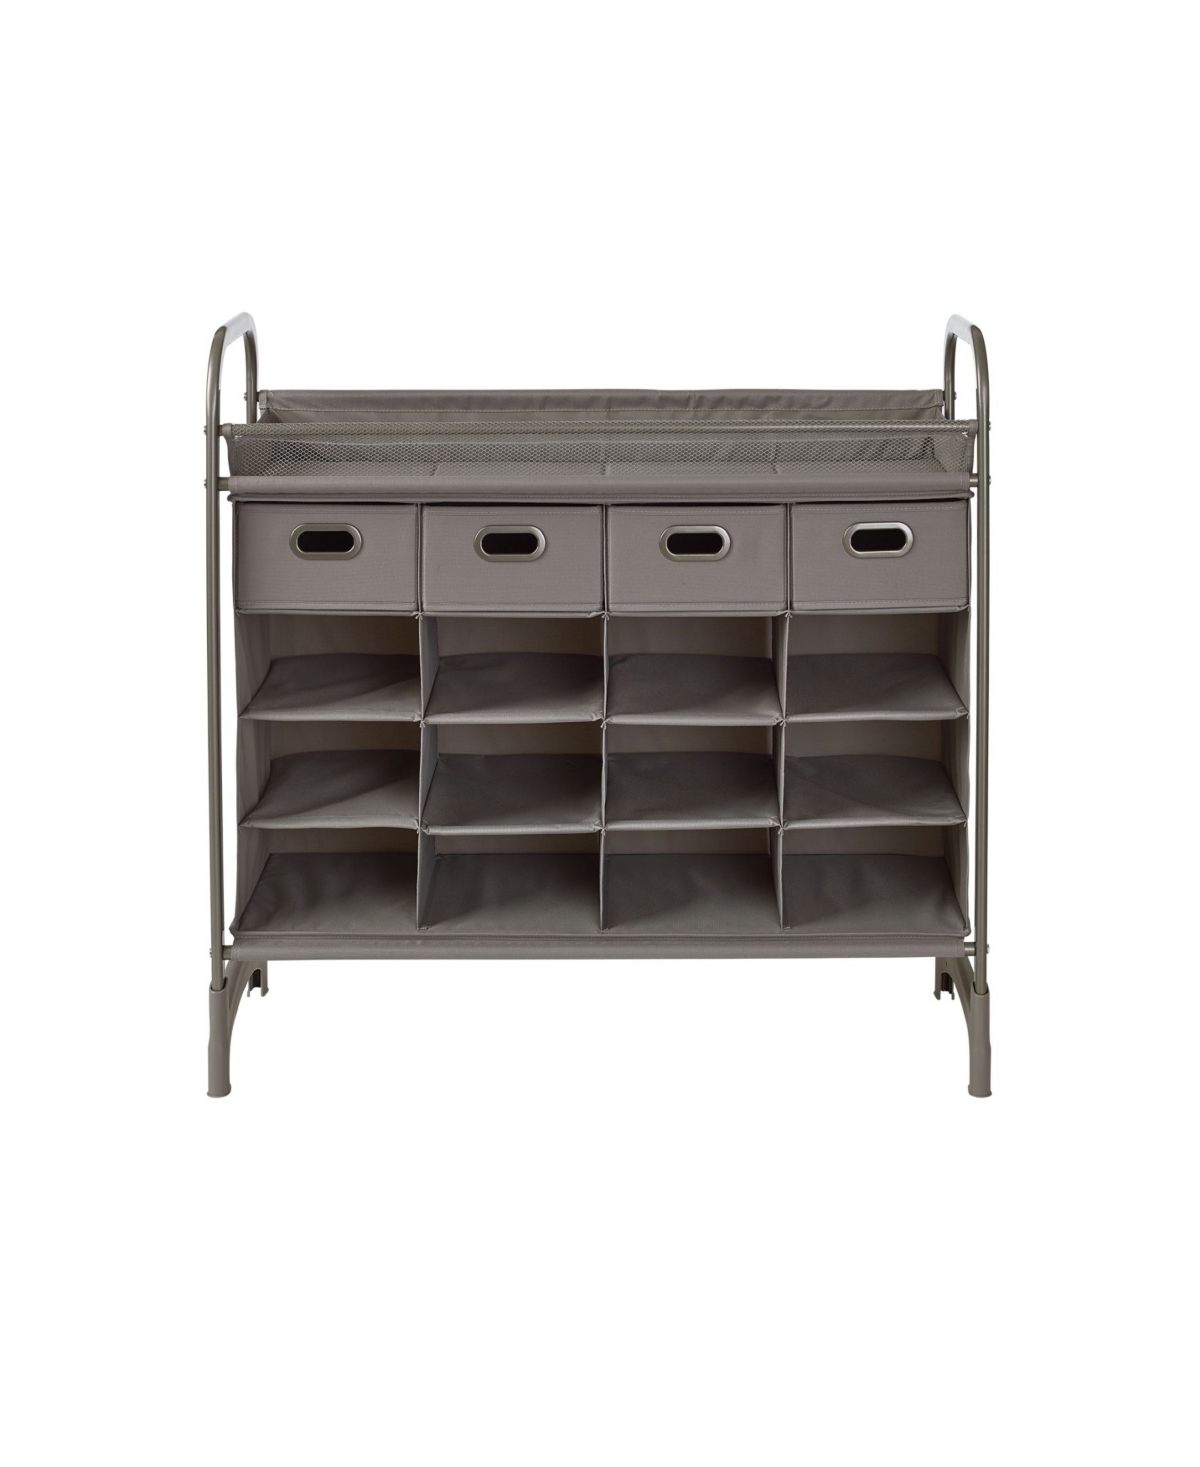 Stackable 16 Cubby Shoe Organizer with Drawers - Brushed Nickel